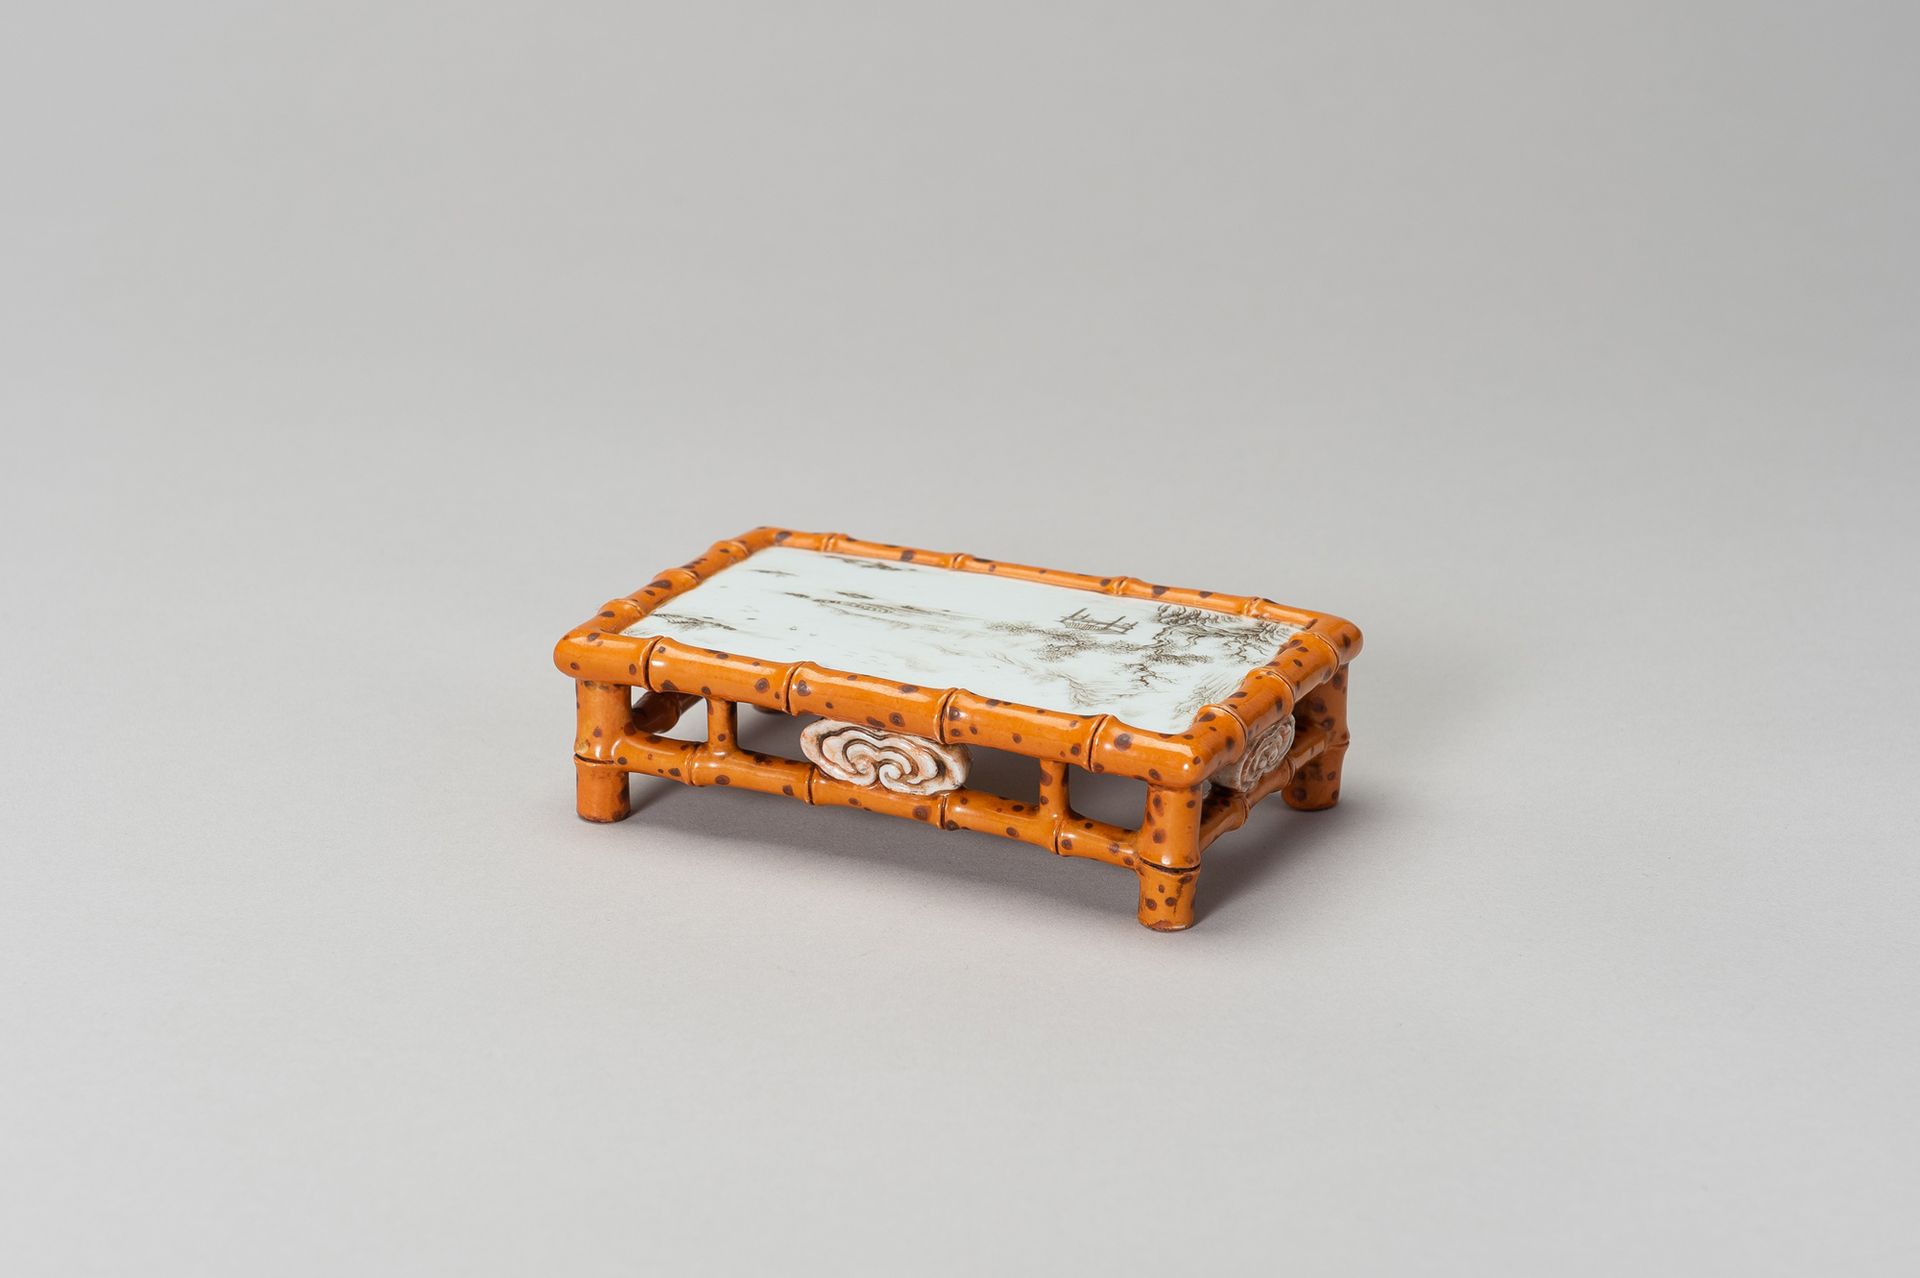 A RARE PORCELAIN BRUSH HOLDER IN FORM OF A SMALL TABLE 罕见的陶瓷笔筒小桌形状
中国，清朝（1644-19&hellip;